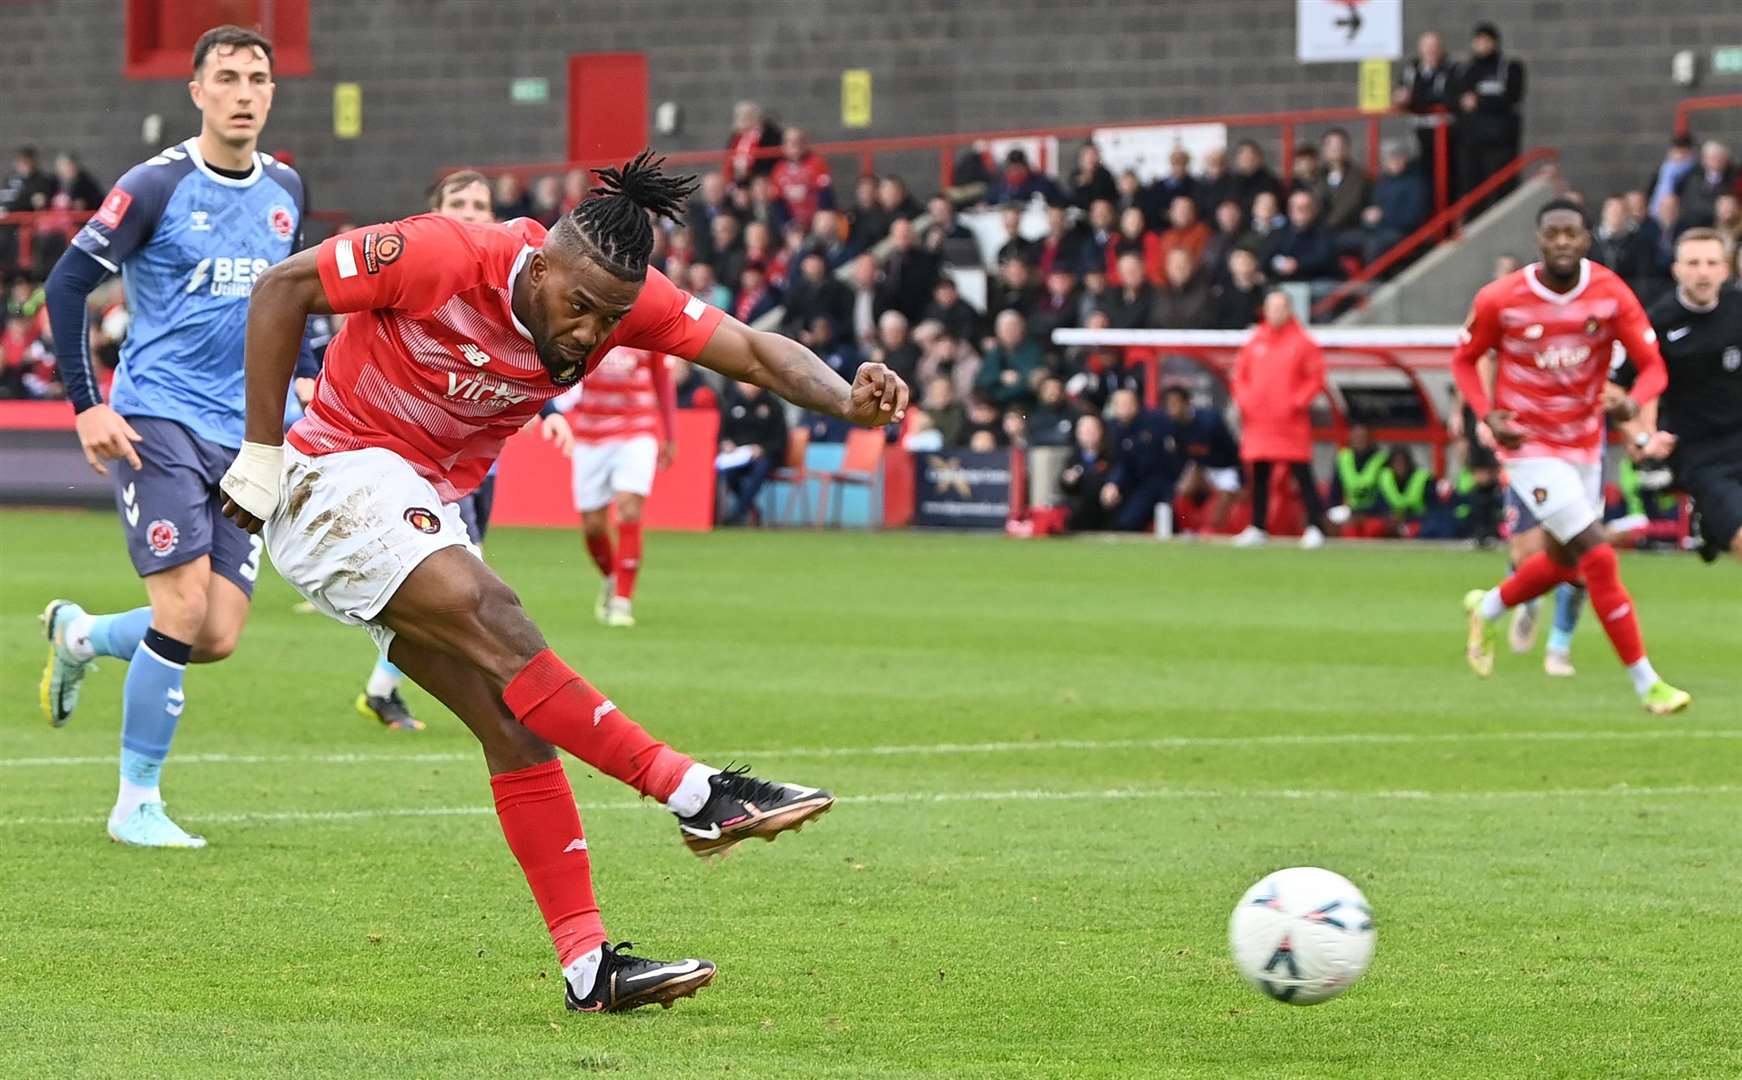 Dominic Poleon shoots wide for Ebbsfleet in the first half on Sunday. Picture: Keith Gillard